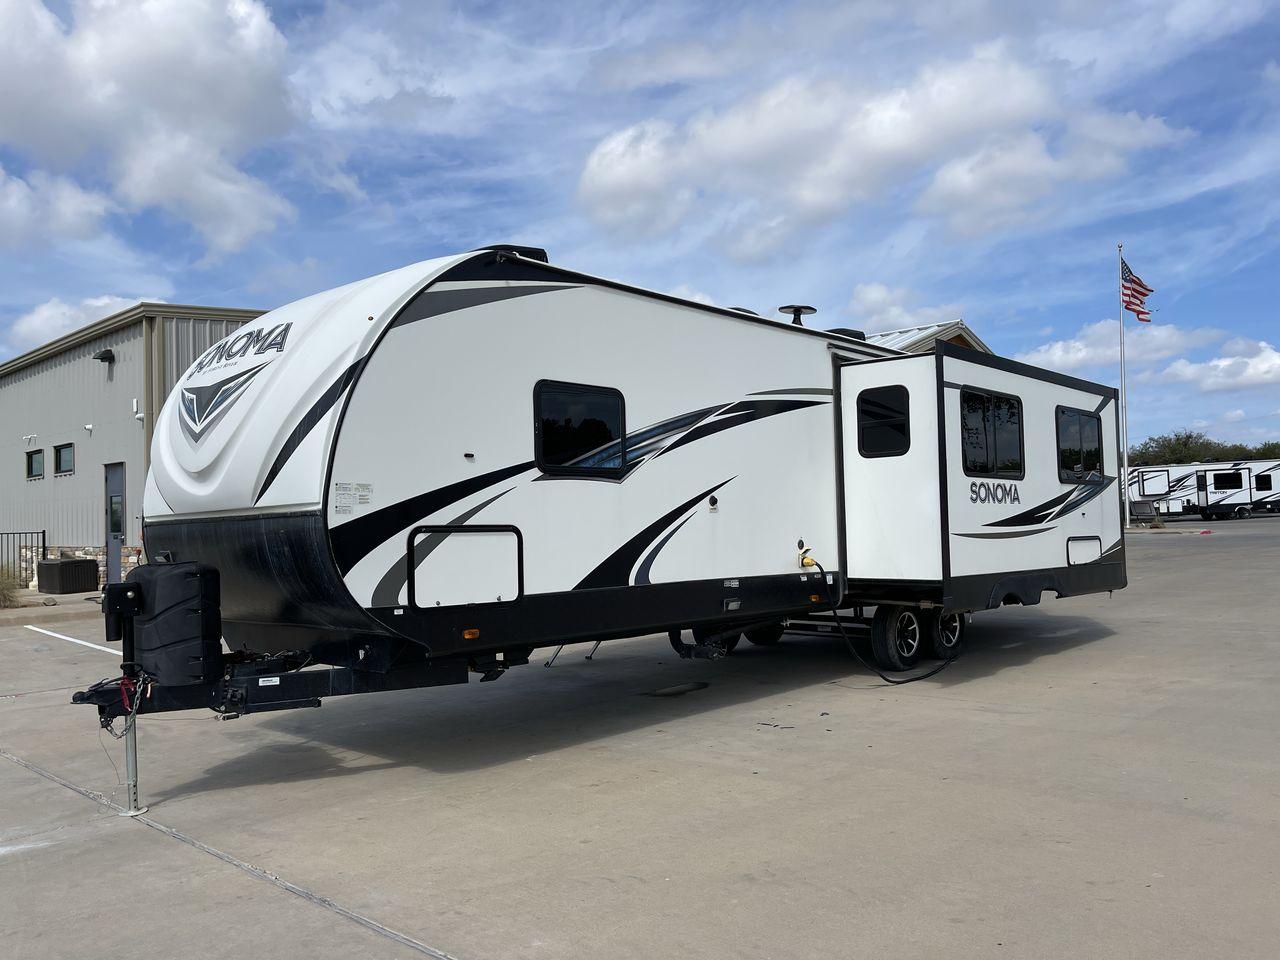 2020 FOREST RIVER SONOMA 2903RK (4X4TSKE28LE) , Length: 34.75 ft. | Dry Weight: 7,799 lbs. | Gross Weight: 9,999 lbs. | Slides: 1 transmission, located at 4319 N Main Street, Cleburne, TX, 76033, (817) 221-0660, 32.435829, -97.384178 - Experience extraordinary adventures with the 2020 Forest River Sonoma 2903RK. Measuring 34.75 feet long and weighing 7,799 pounds dry, this unit is both large and lightweight, making it easy to pull and handle. The Sonoma 2903RK provides adequate living space without sacrificing practicality with a - Photo #23